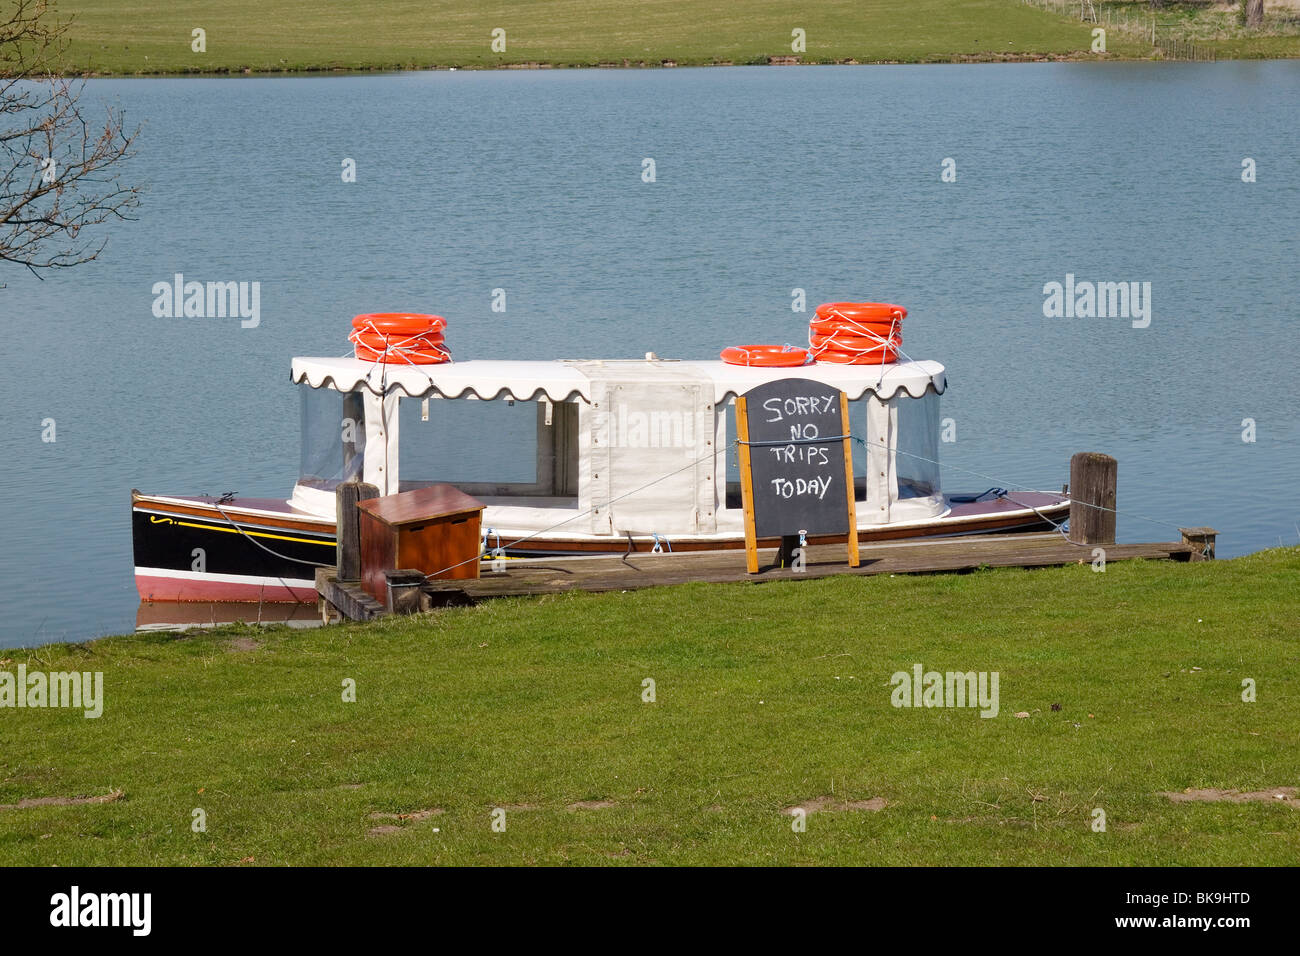 'Sorry No Trips Today' launch on the lake at Holkham Hall Norfolk Stock Photo